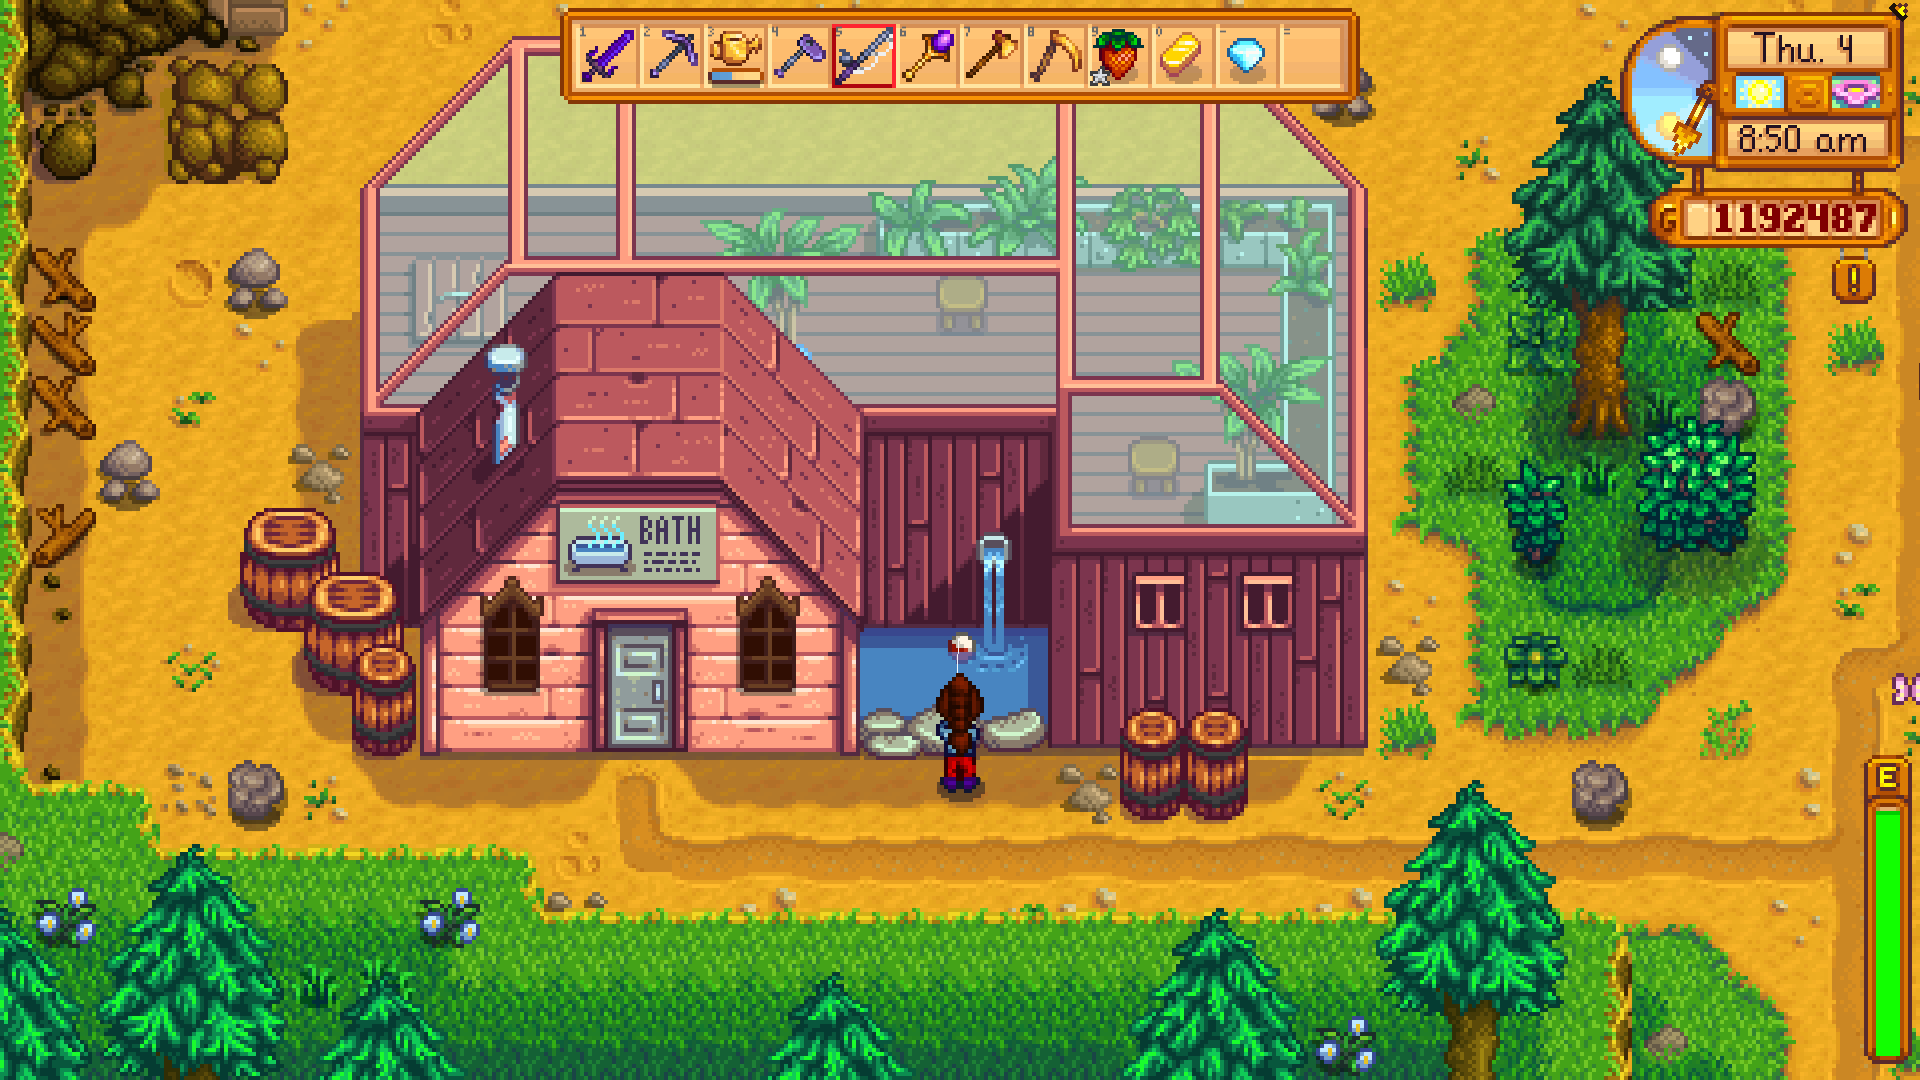 Screenshot of Stardew Valley. The player fishes in the small pond outside the bathhouse.